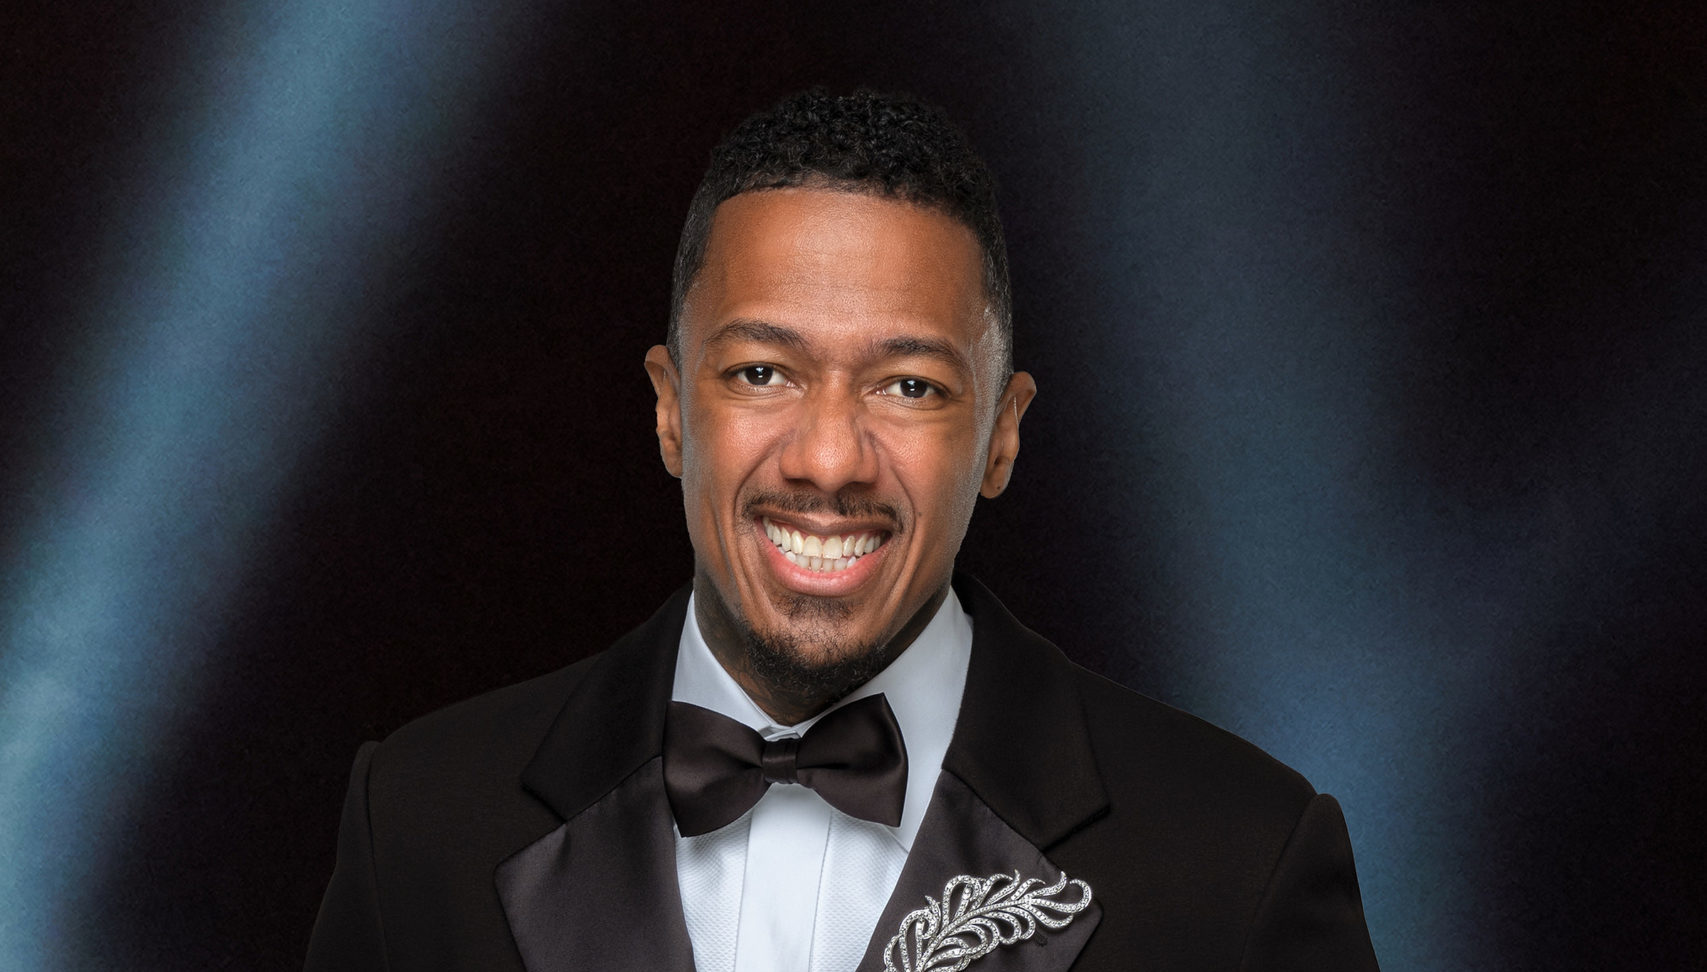 Less than two months after the birth of his eighth child, Nick Cannon announced that he would become a father again.